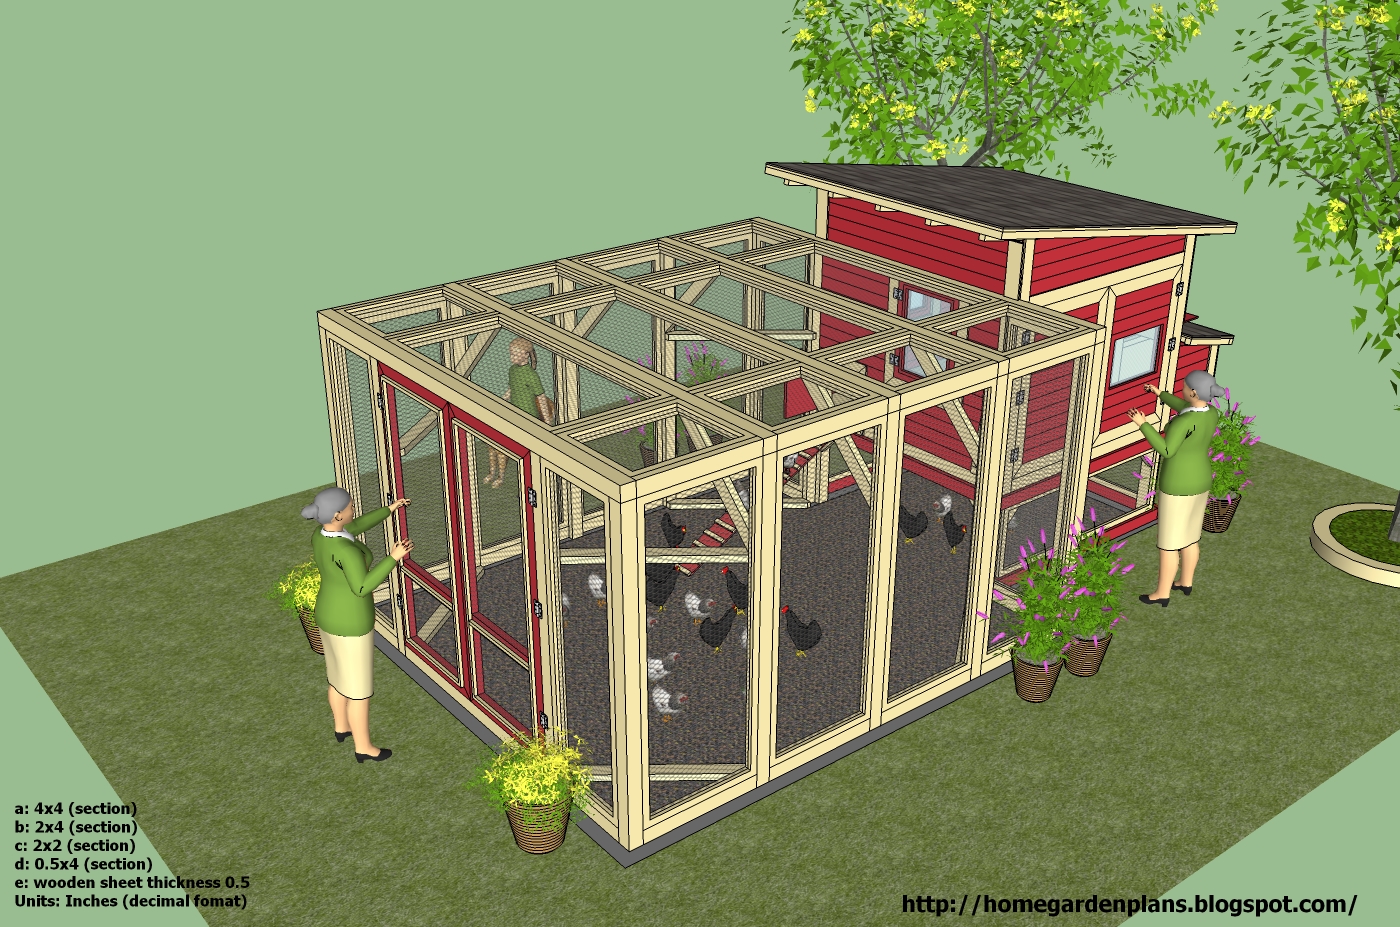  Chicken Coop Plans Construction - Chicken Coop Design - How To Build A